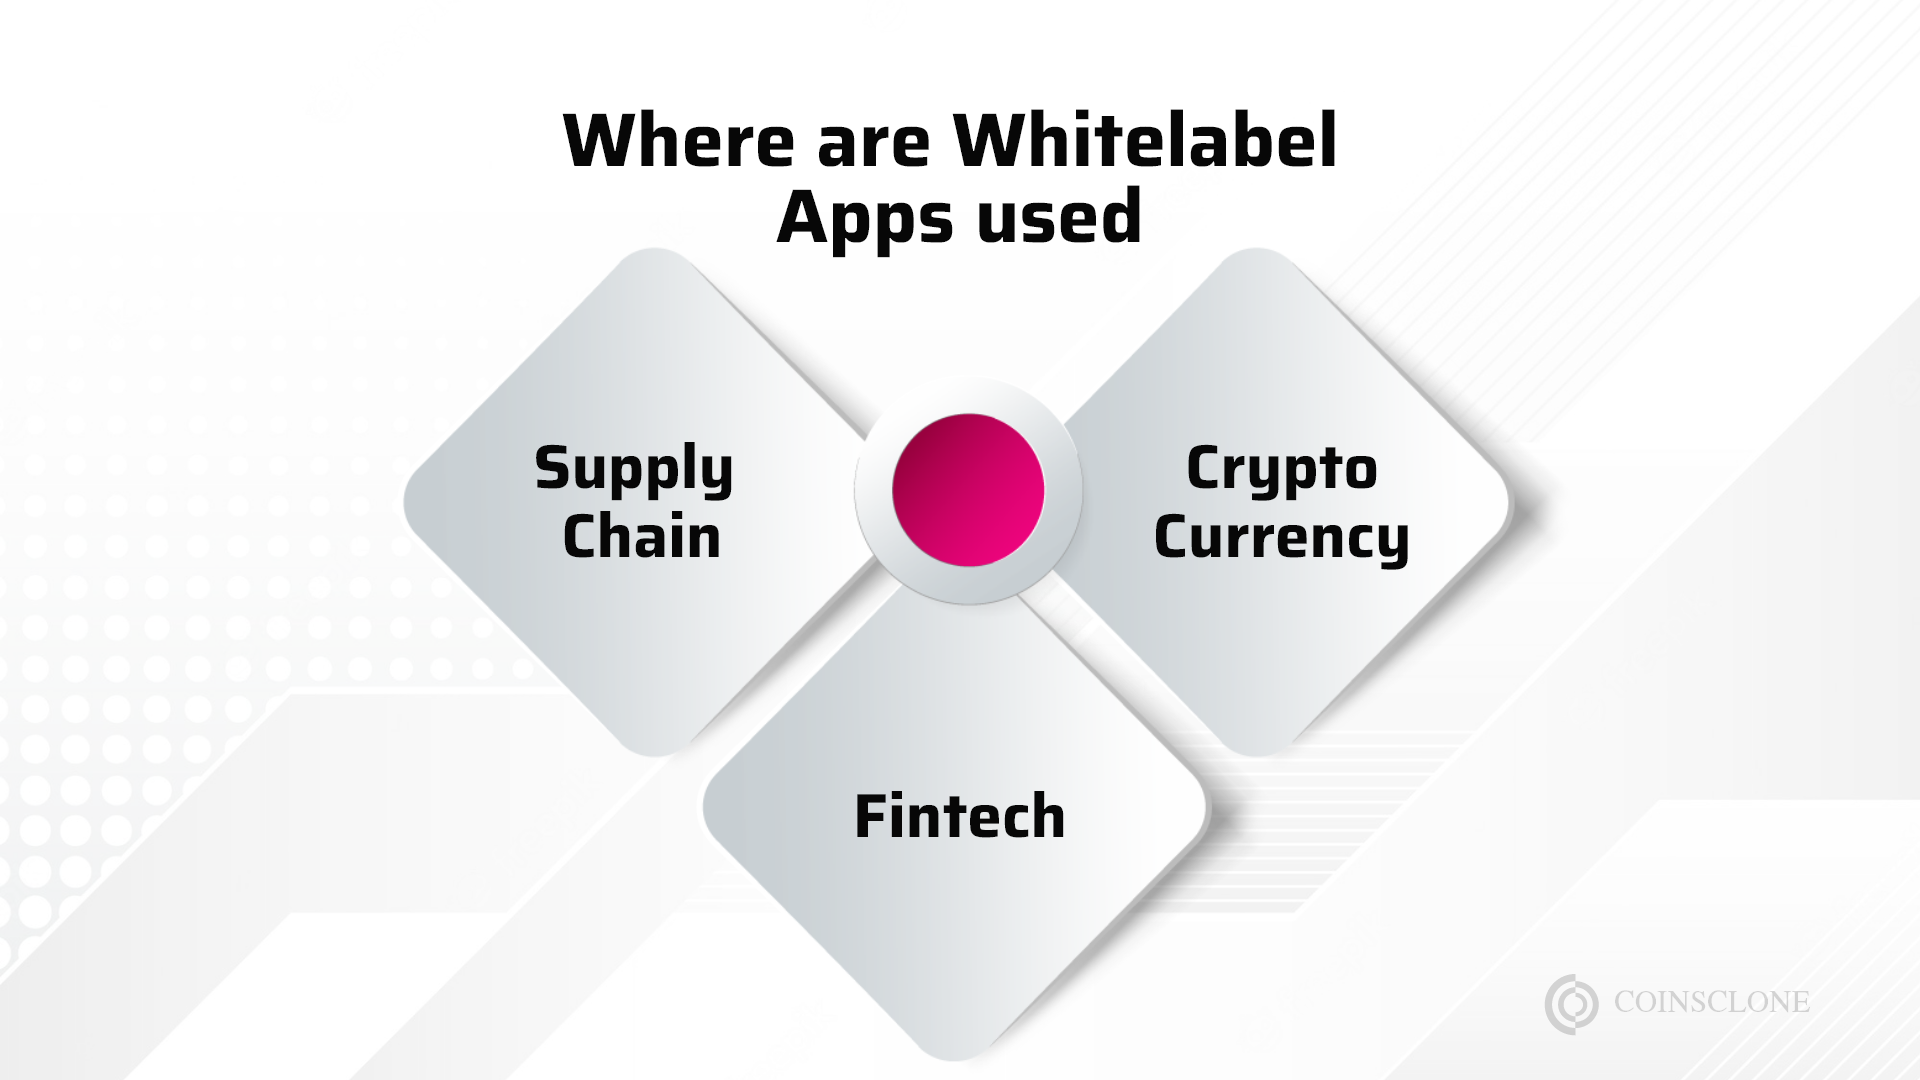 Where are Whitelabel Apps used